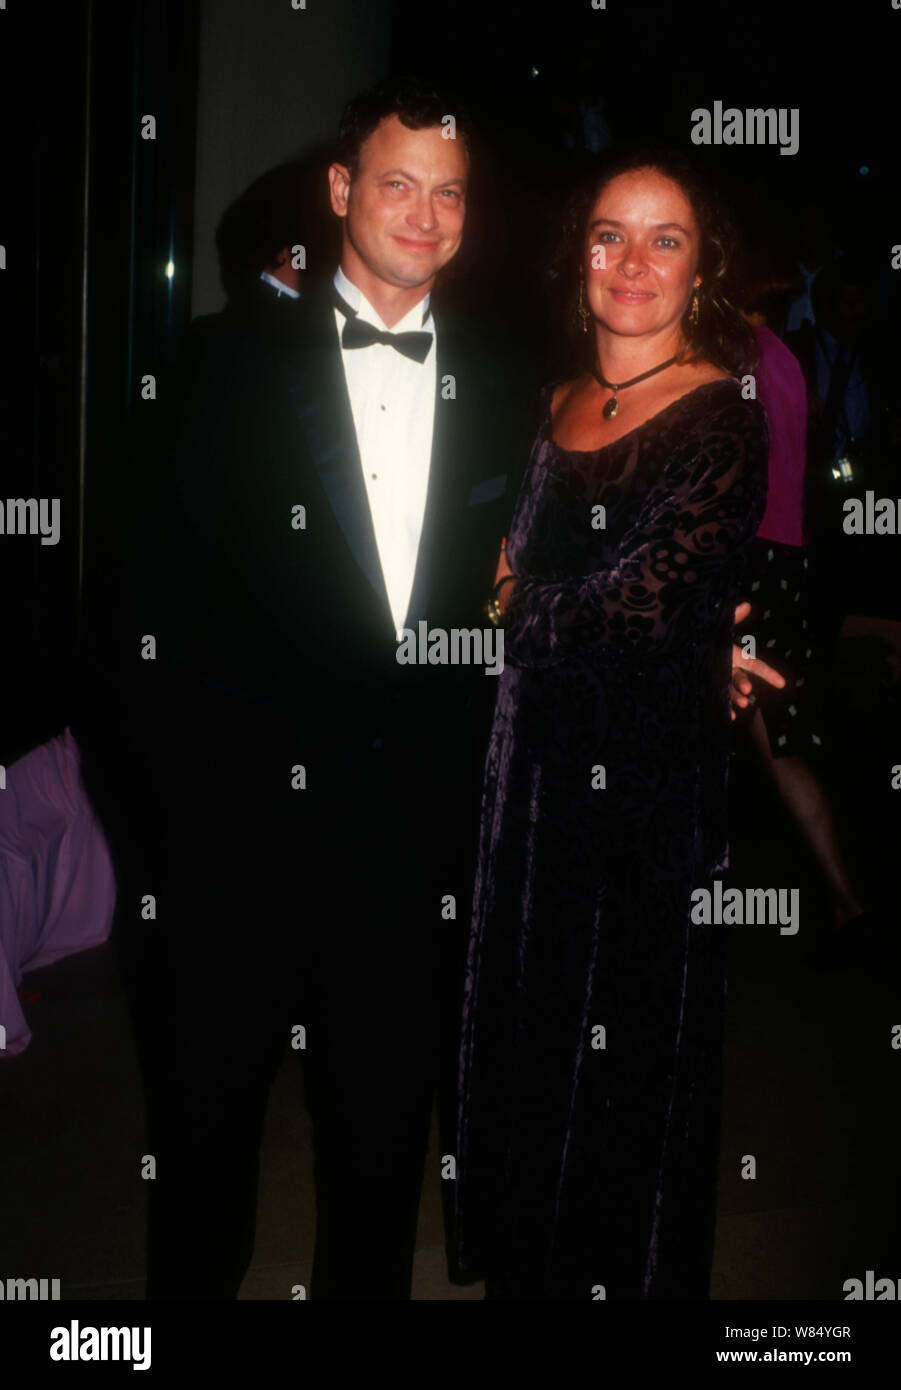 Beverly Hills, California, USA 28th October 1994 Actor Gary Sinise and Moira Harris attend the 1994 Carousel of Hope Ball to Benefit the Barbara Davis Center for Childhood Diabetes on October 28, 1994 at the Beverly Hilton Hotel in Beverly Hills, California, USA. Photo by Barry King/Alamy Stock Photo Stock Photo